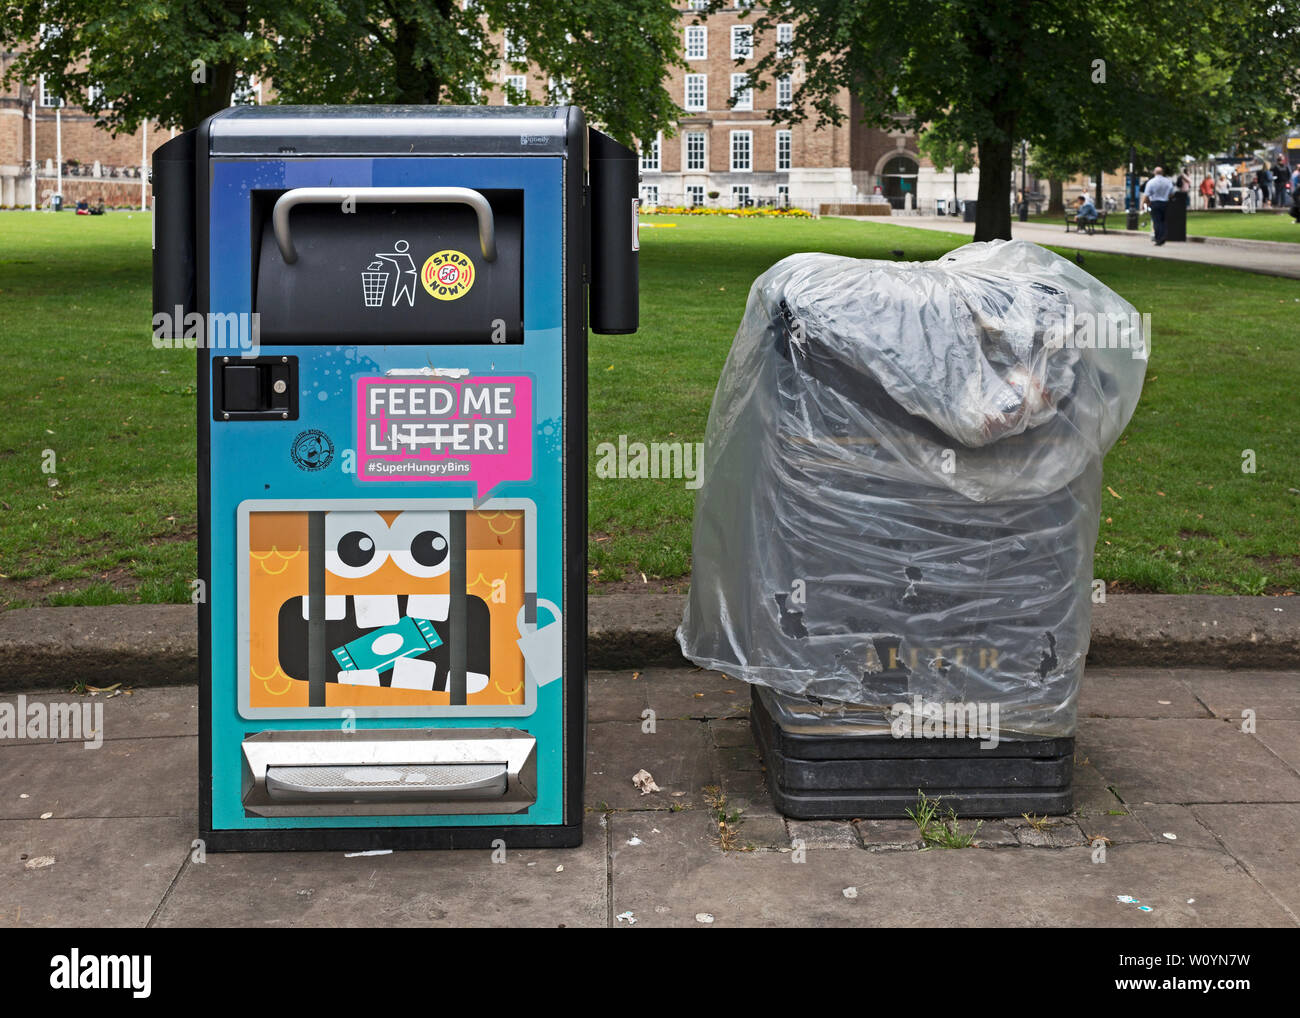 A new bin which compacts litter alongside one of the traditional bins which it has replaced on College Green in Bristol, UK. Stock Photo